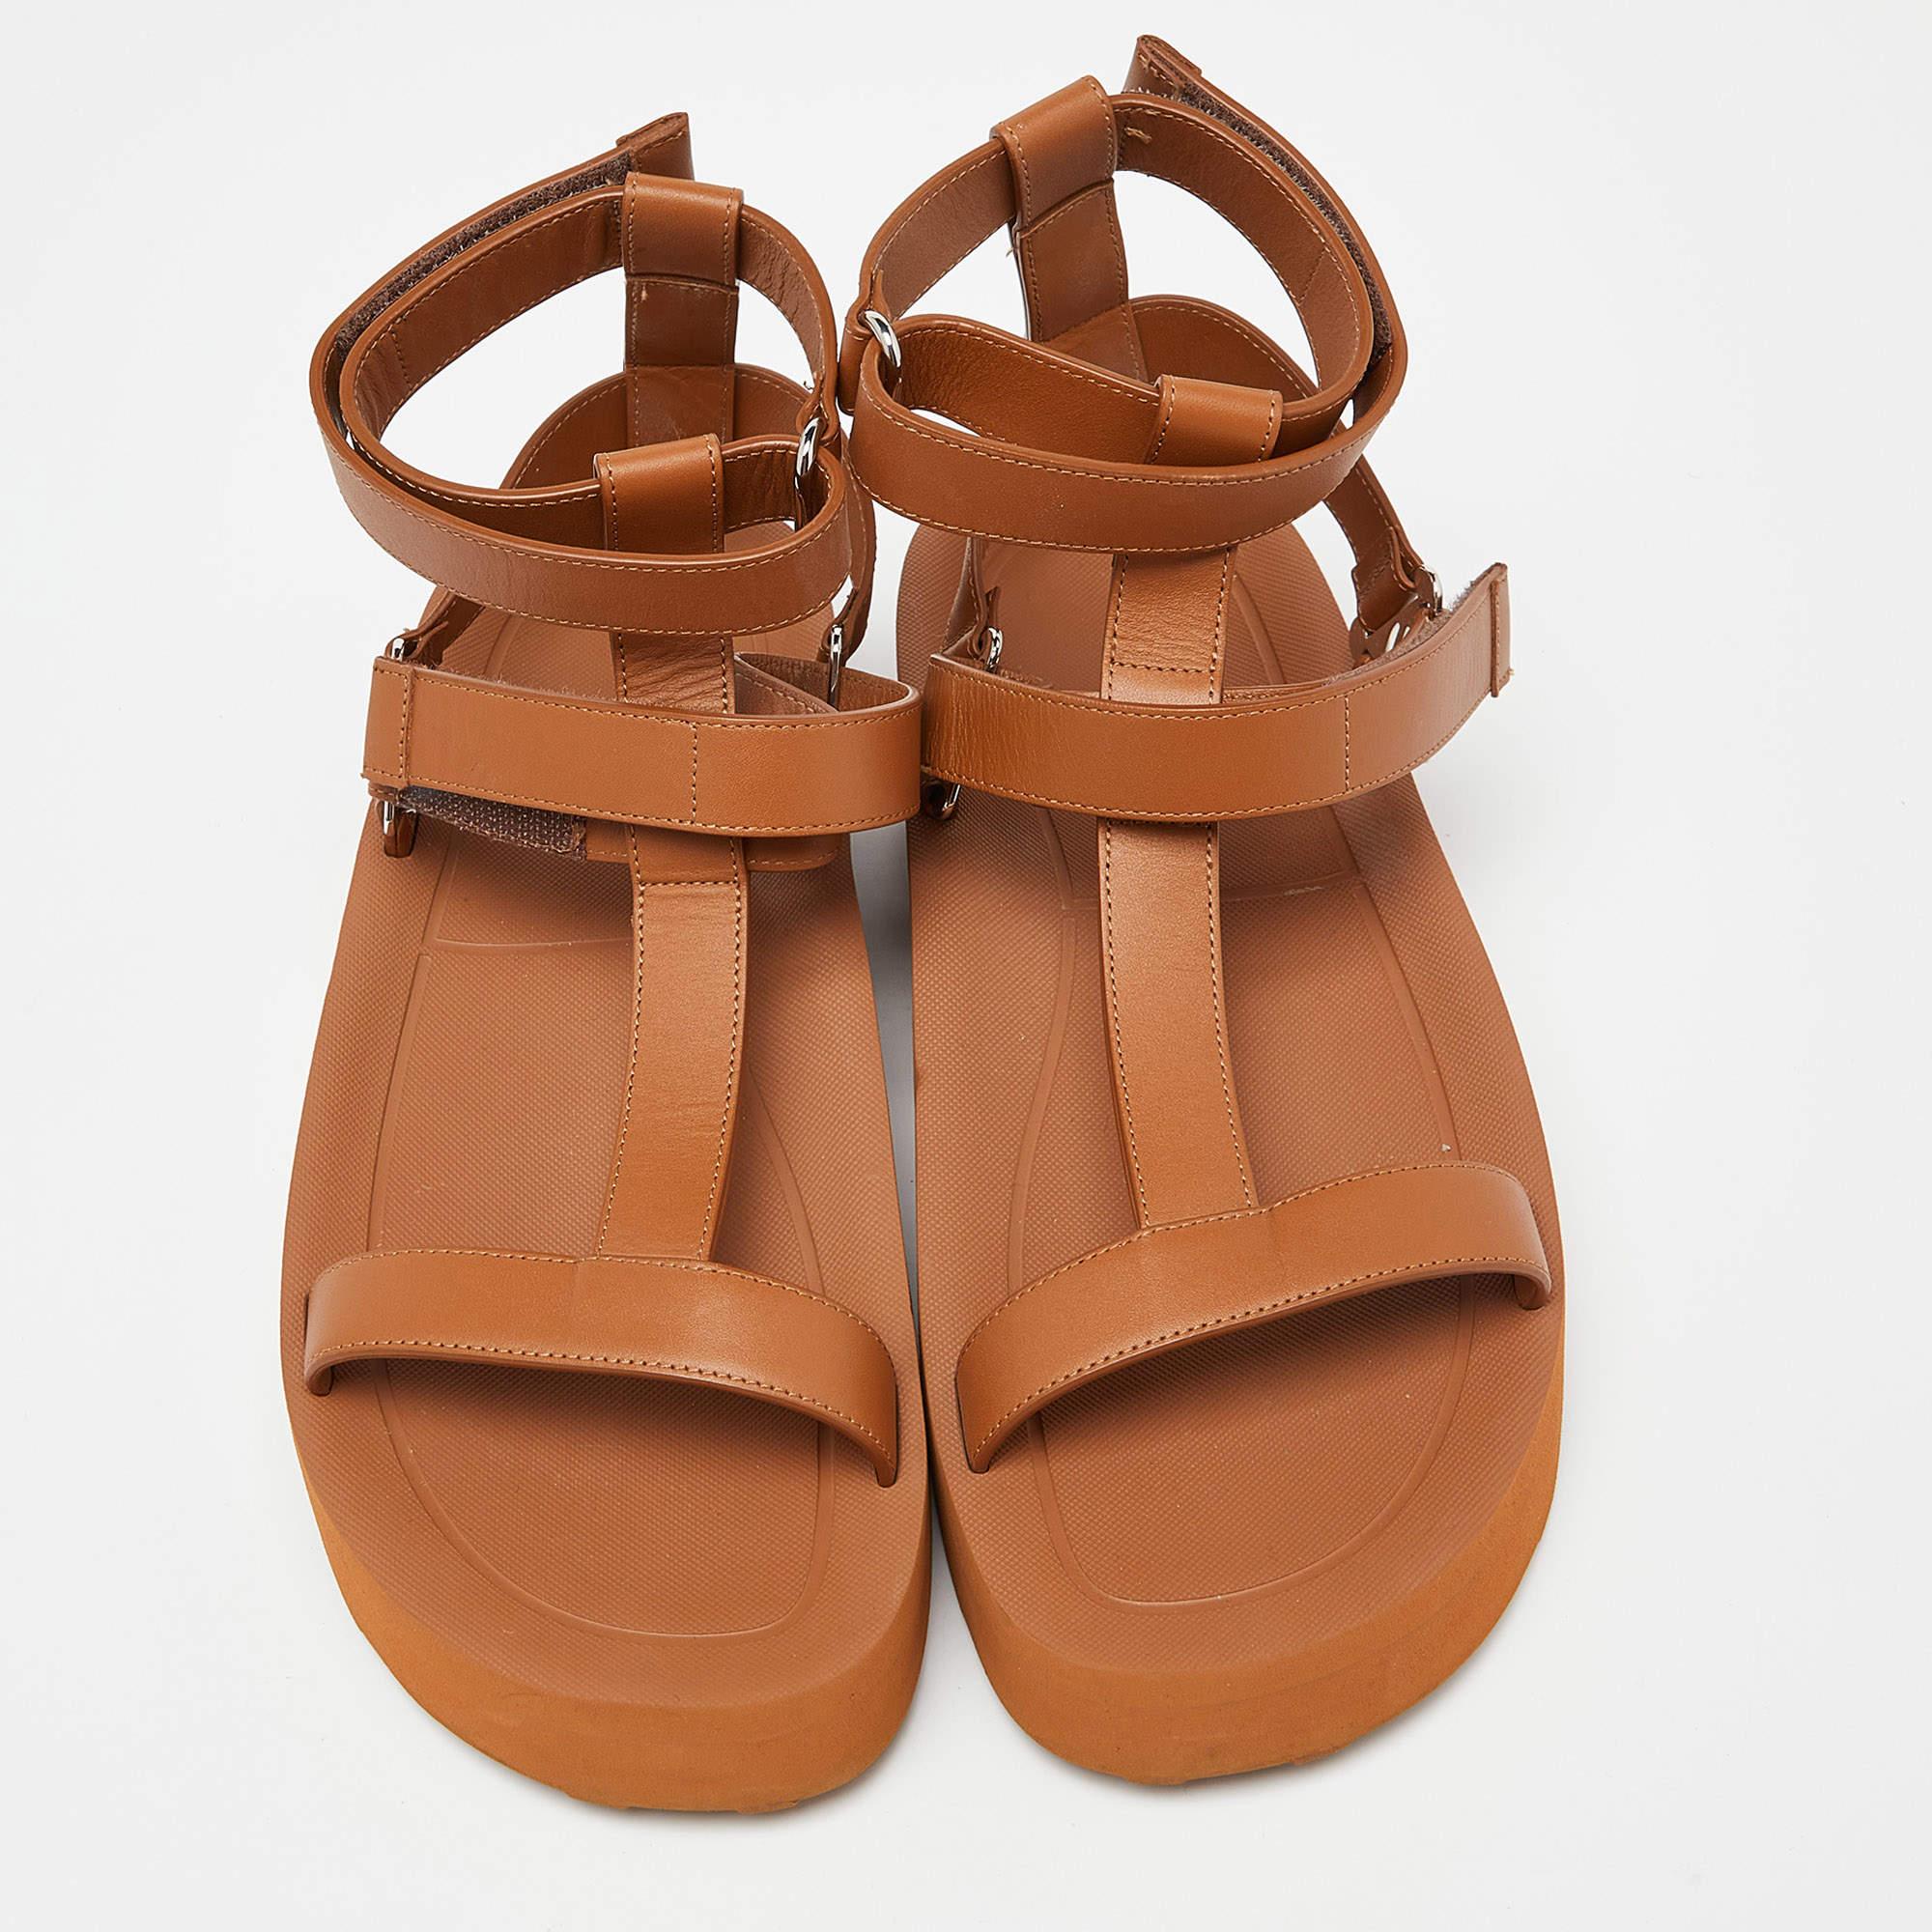 The Hermès Enid sandals are a luxurious and stylish footwear choice. Crafted from high-quality brown leather, these sandals feature a classic gladiator design with multiple straps, a comfortable footbed, and the iconic Hermès craftsmanship. Perfect